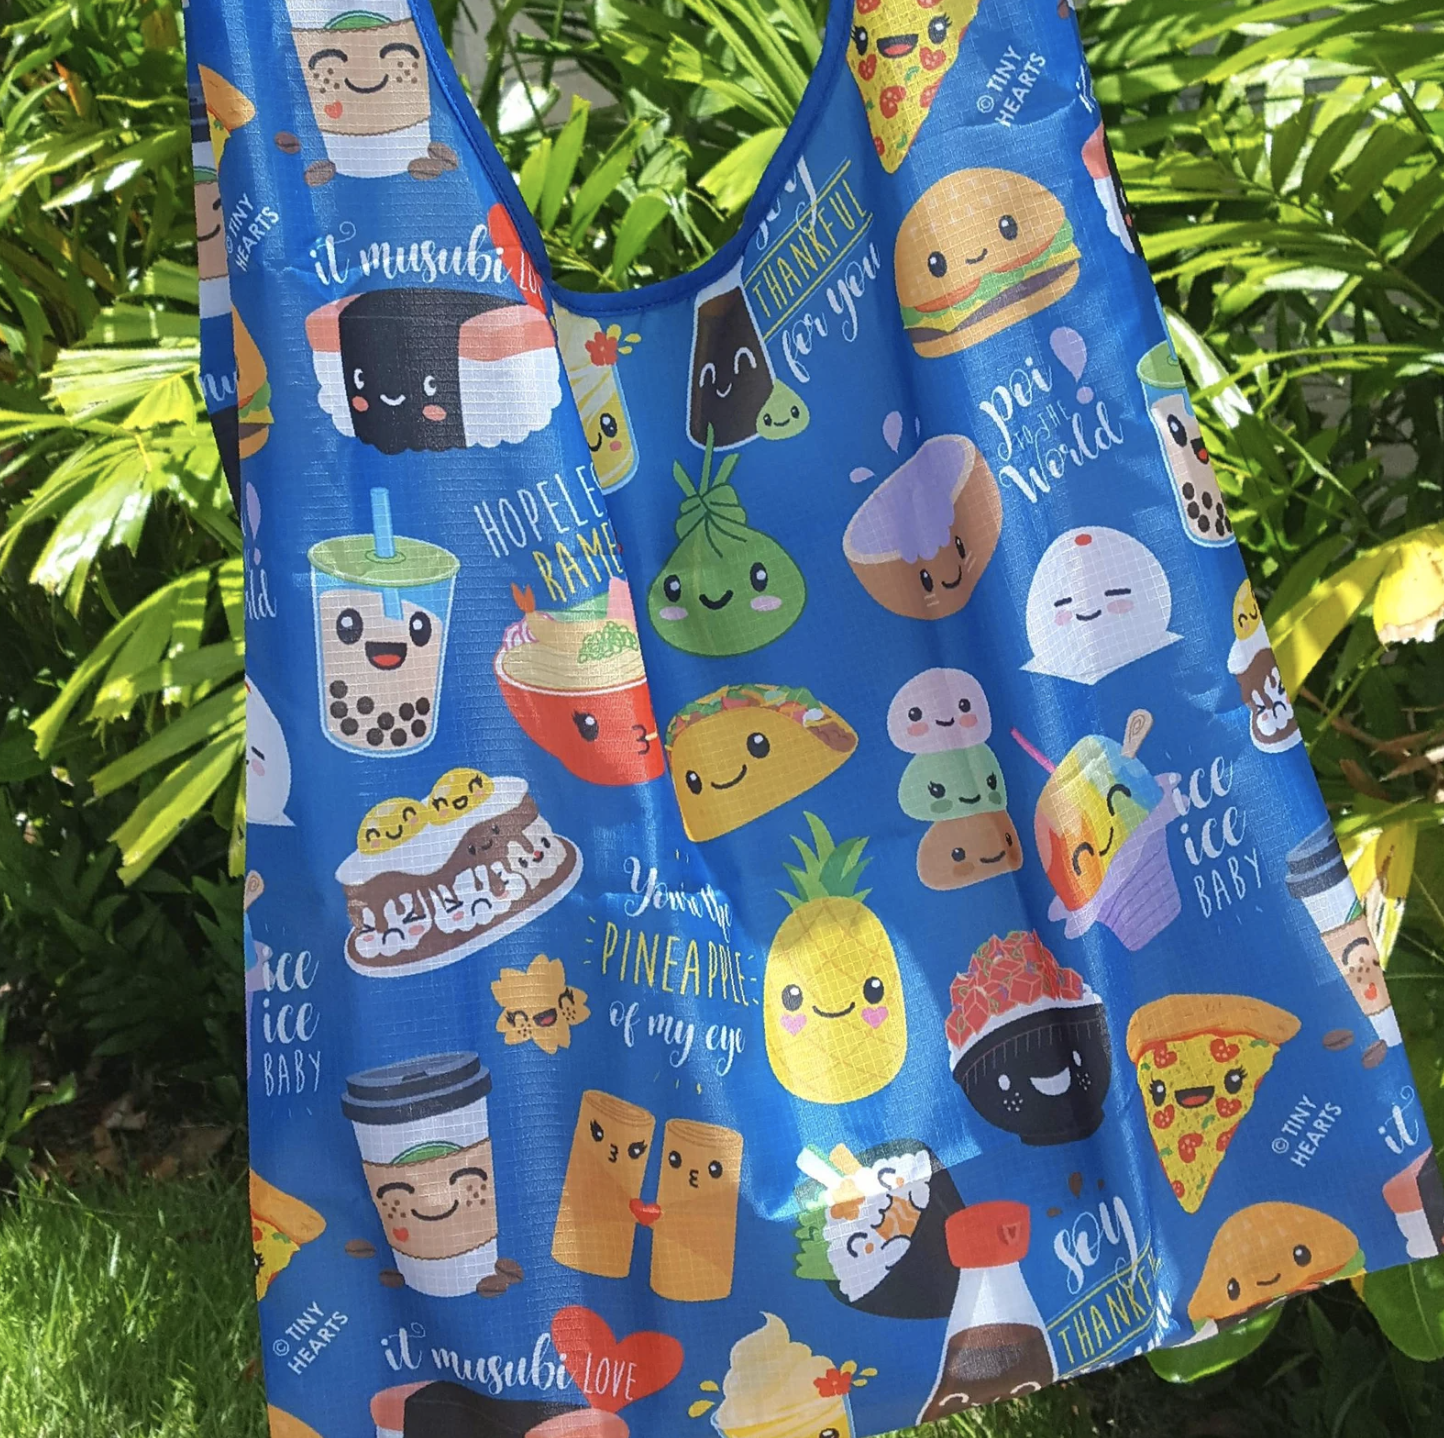 Nylon tote bag being with various smiling food characters.